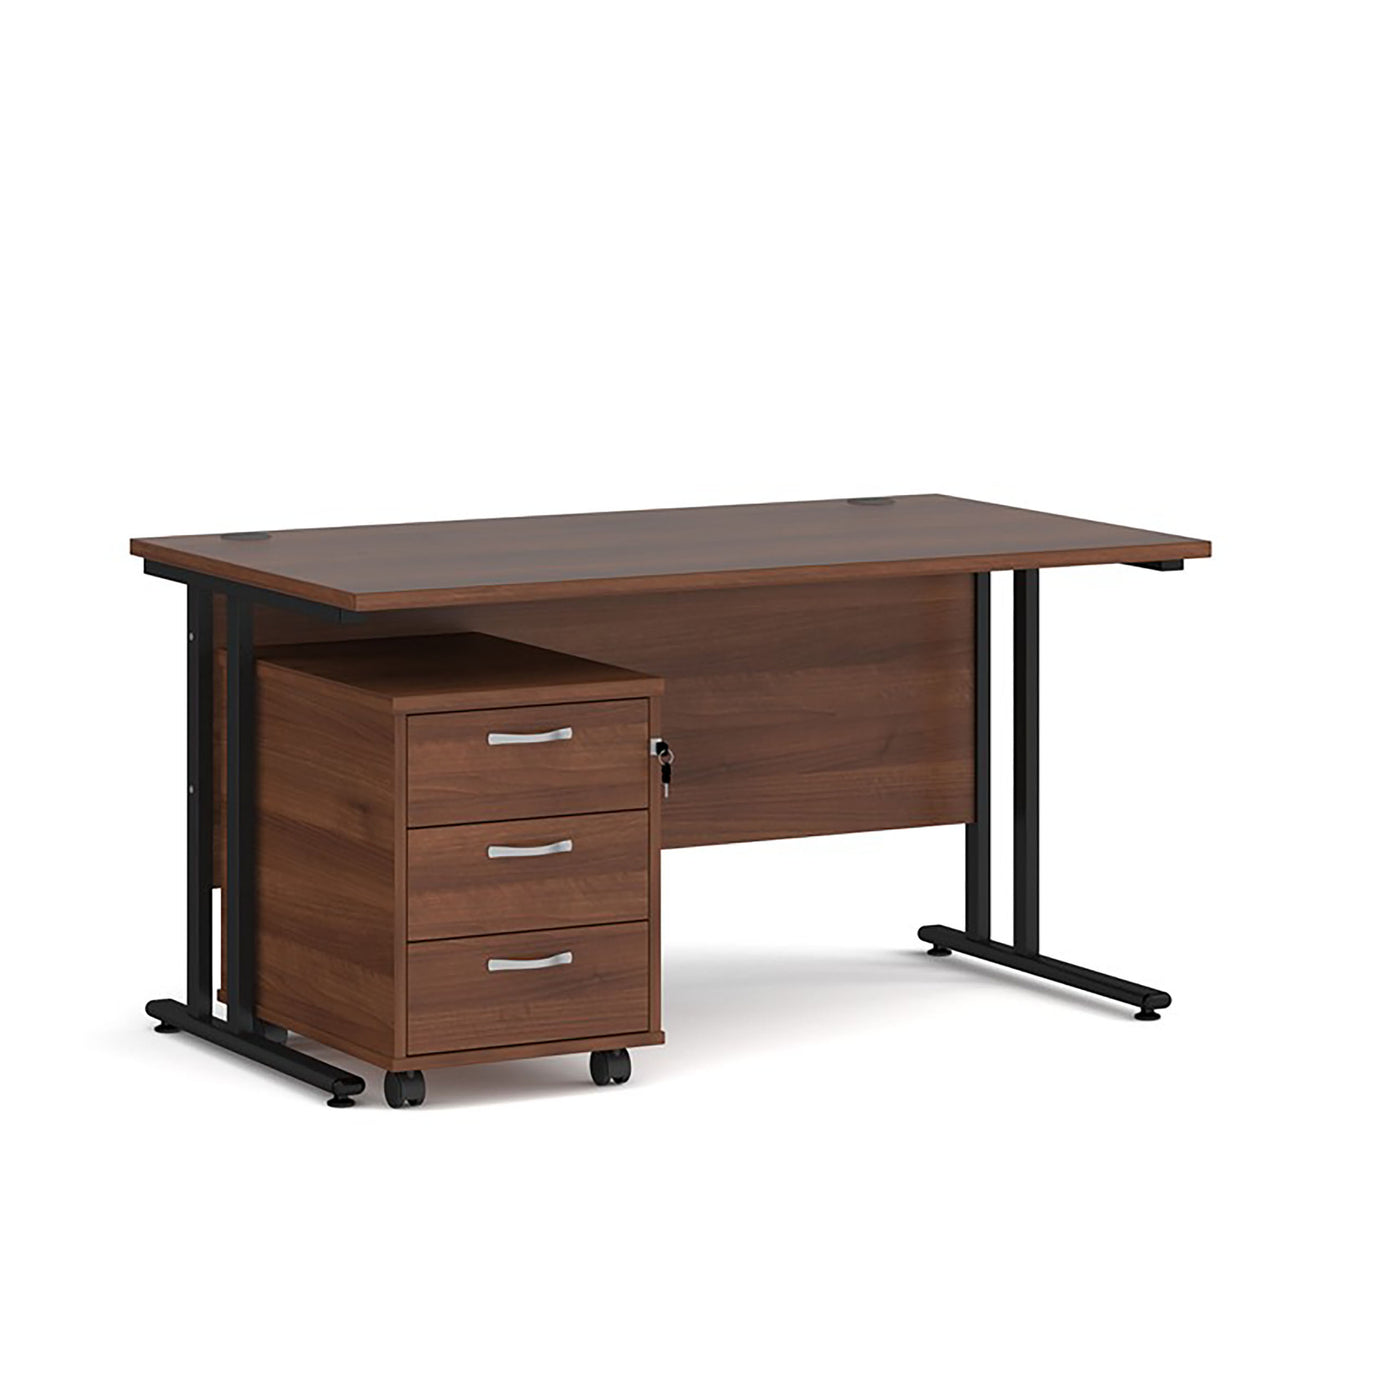 Maestro 25 with 3 Drawer Pedestal | Home Office Desk with Storage | Work From Home | Home Office Furniture | Desk with StorageMaestro 25 with 3 Drawer Pedestal | Home Office Desk with Storage | Work From Home | Home Office Furniture | Desk with Storage